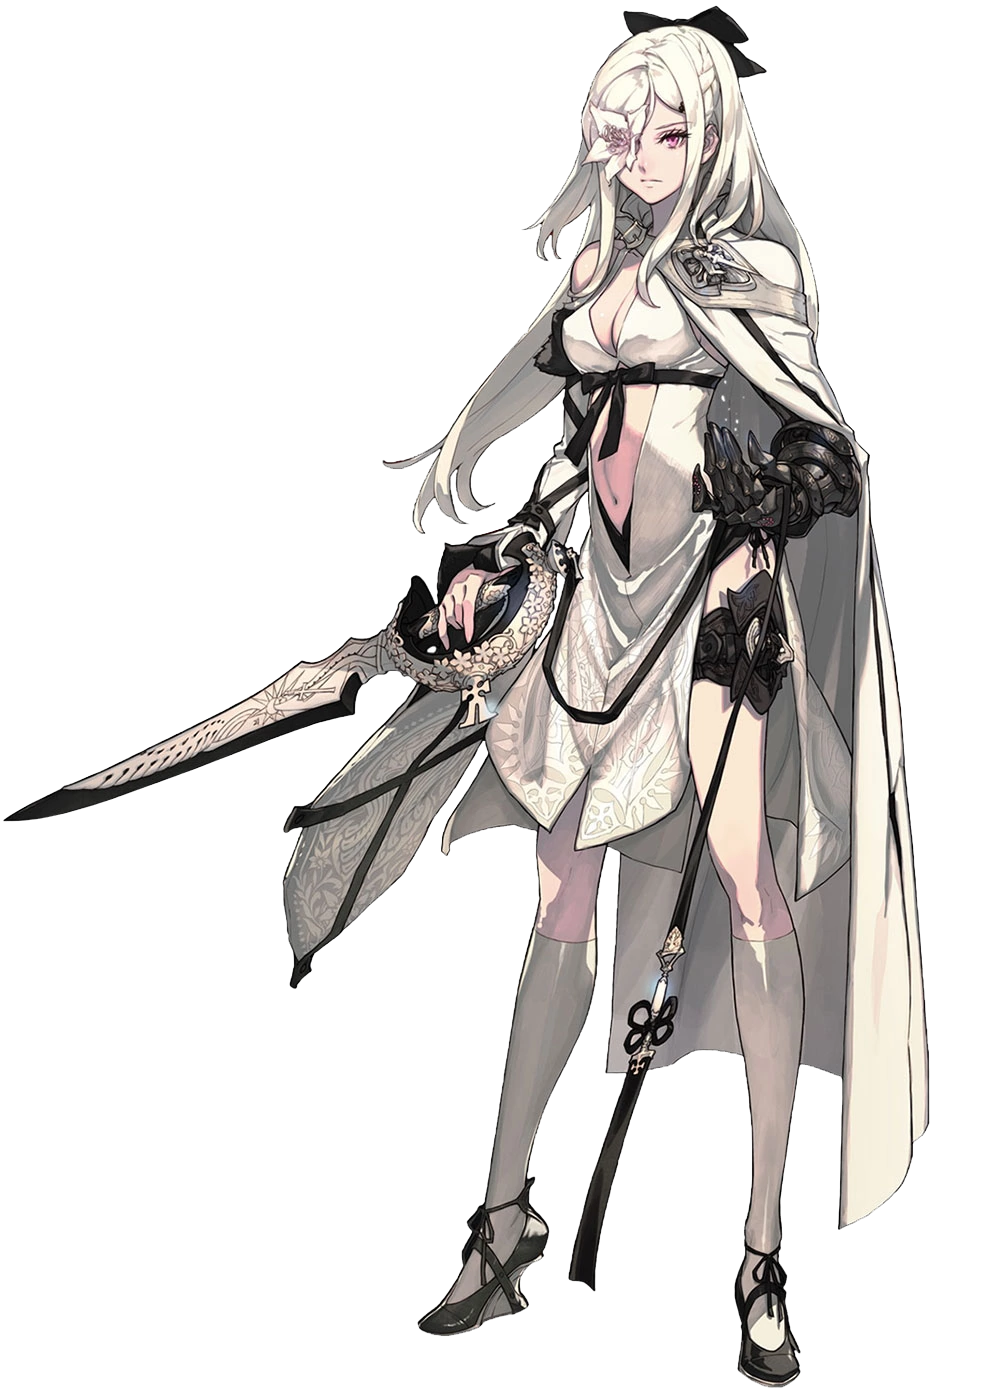 Official portrait of Zero, a thin pale-skinned girl with white hair, wearing a revealing white dress and shoulder cloak with black ribbons and a bow in her hair. She has a black mechanical arm and a pinkish-white flower growing out of her right eye. She is holding a slightly curving saber, also white like most of her outfit, and her expression is serious and sad.